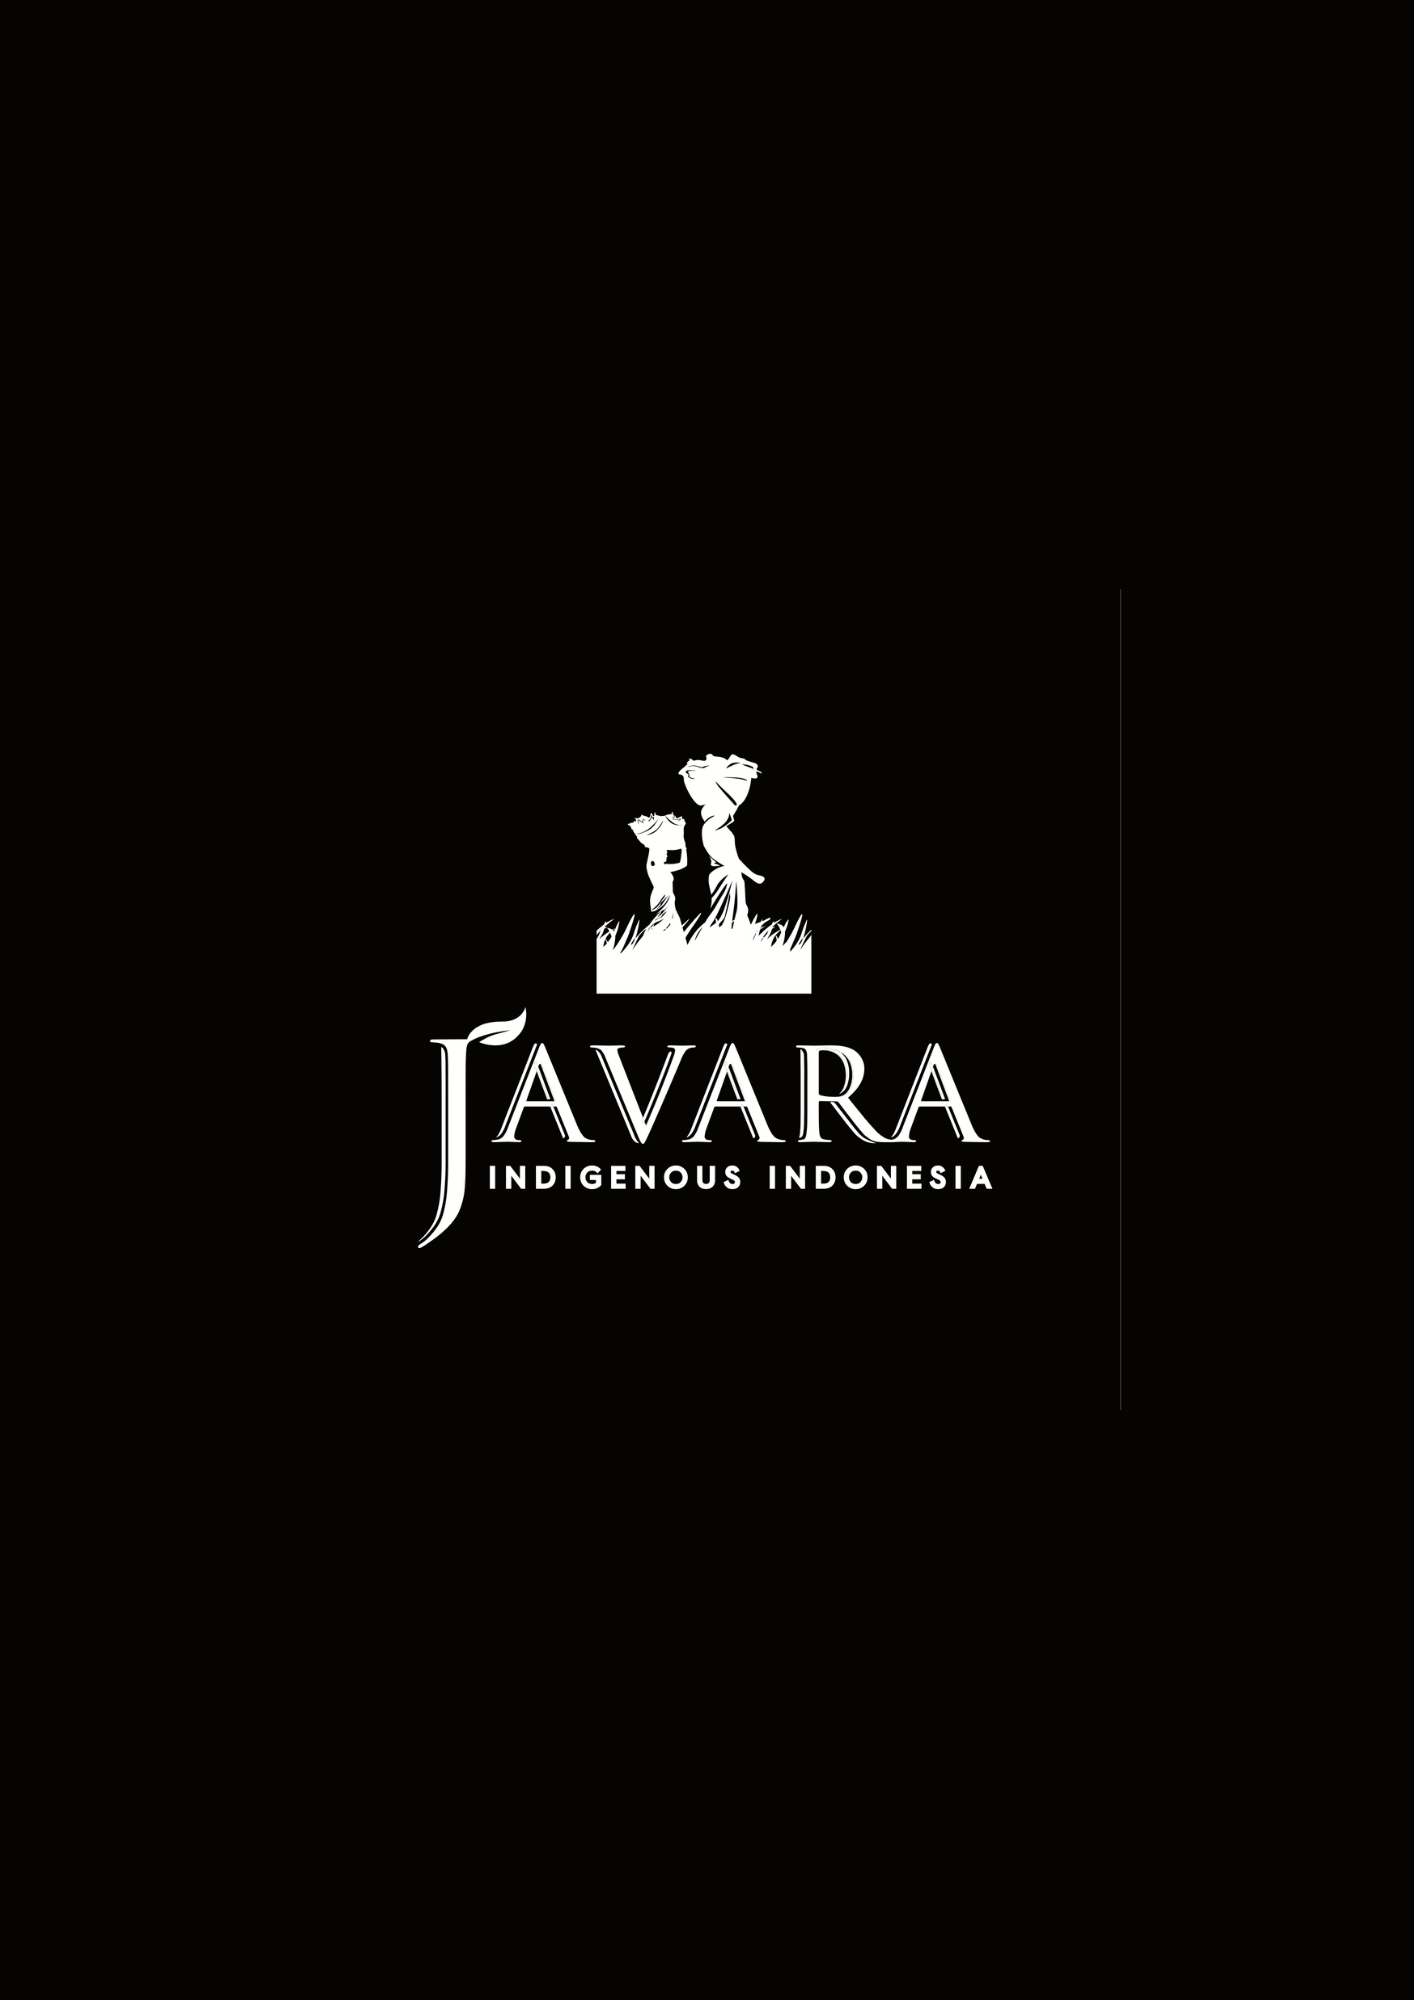 Logo of Javara, Indigenous Indonesia, with the brand name in white font on a black background.